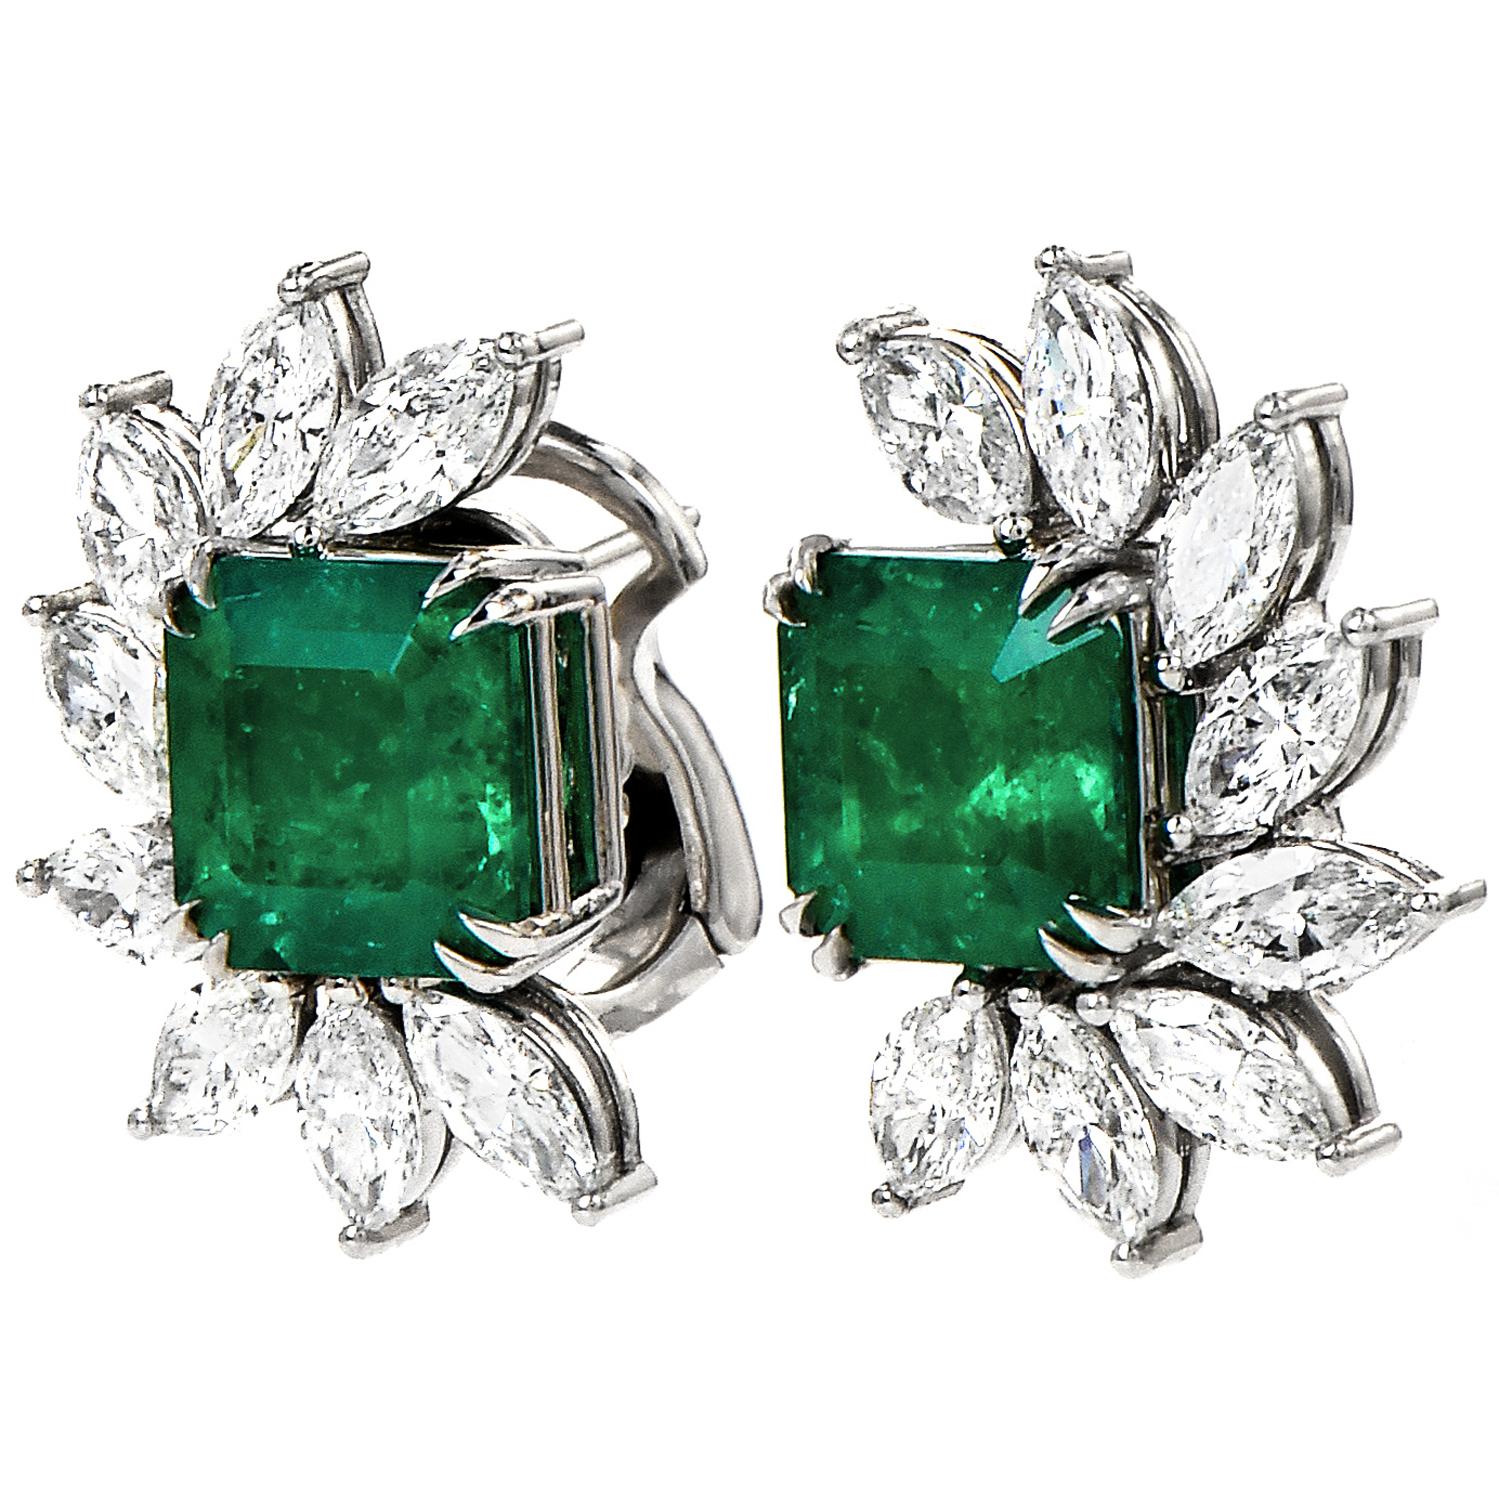 These earrings are the perfect adornment to enhance the beauty of your loved ones.

they are crafted in solid platinum.

Each center has a Vivid Green Emerald, square emerald Cut, prong Set, weighing collectively approx: 5.82 carats.

Giving a